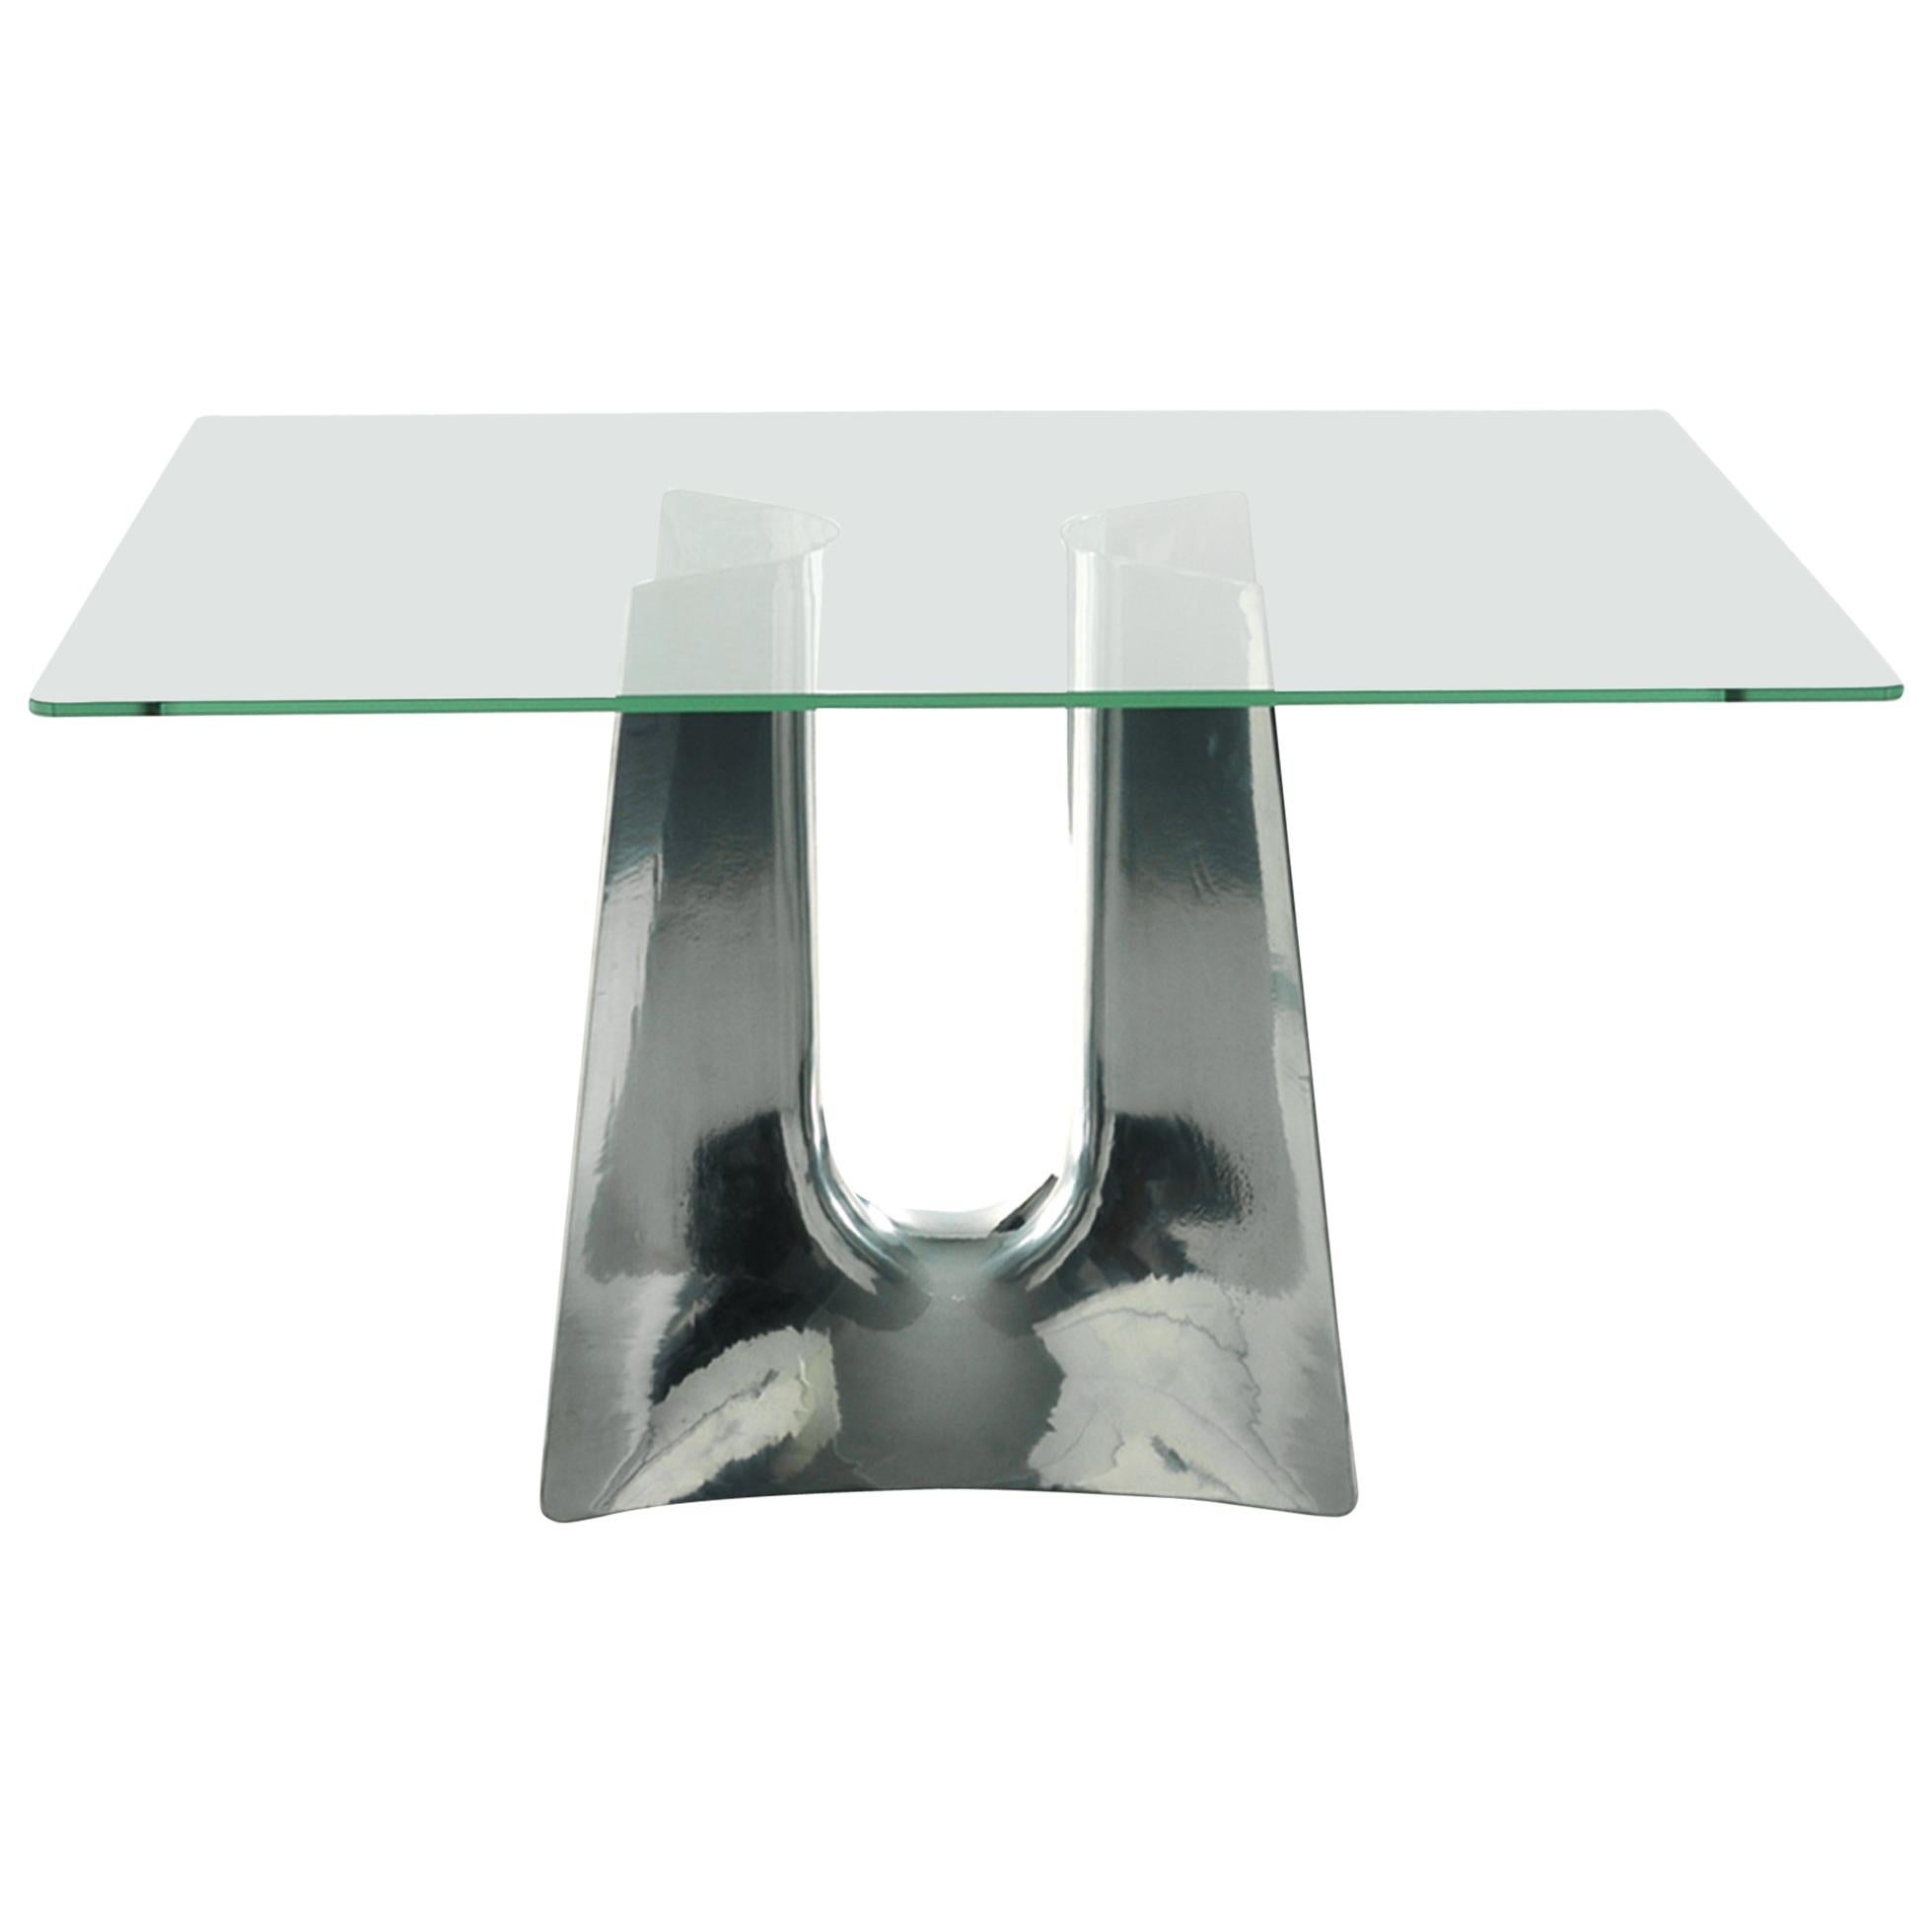 Bentz High Square Aluminum Table W/ Glass Top by Jeff Miller